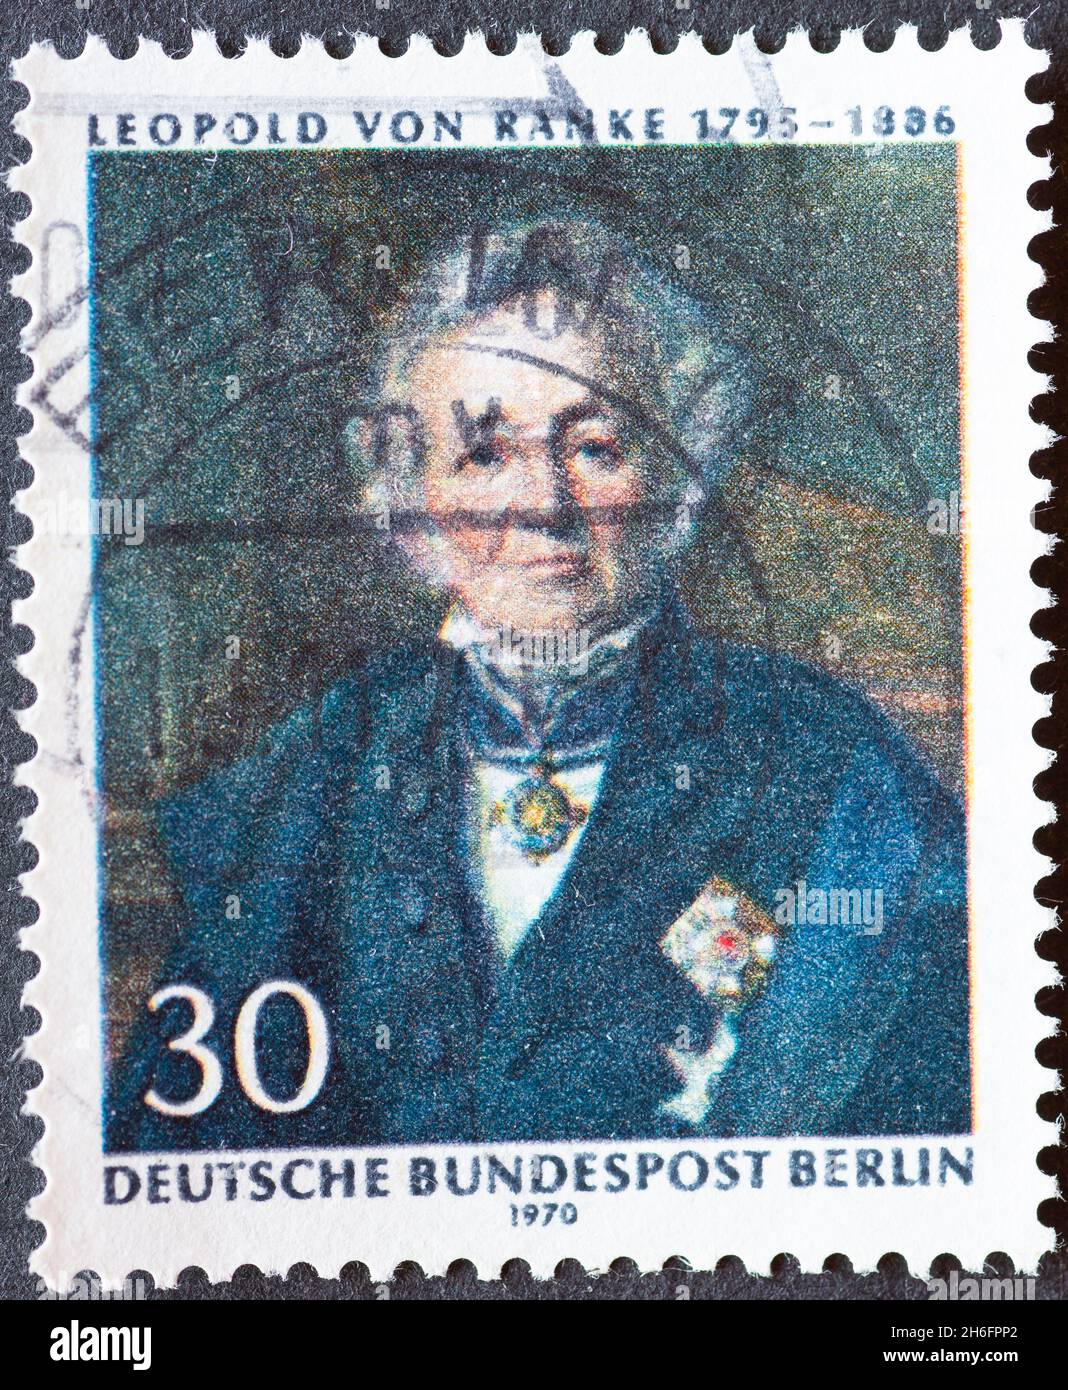 GERMANY, Berlin - CIRCA 1970: a postage stamp from Germany, Berlin showing a portrait of the historian, university lecturer Leopold von Ranke 1795-188 Stock Photo